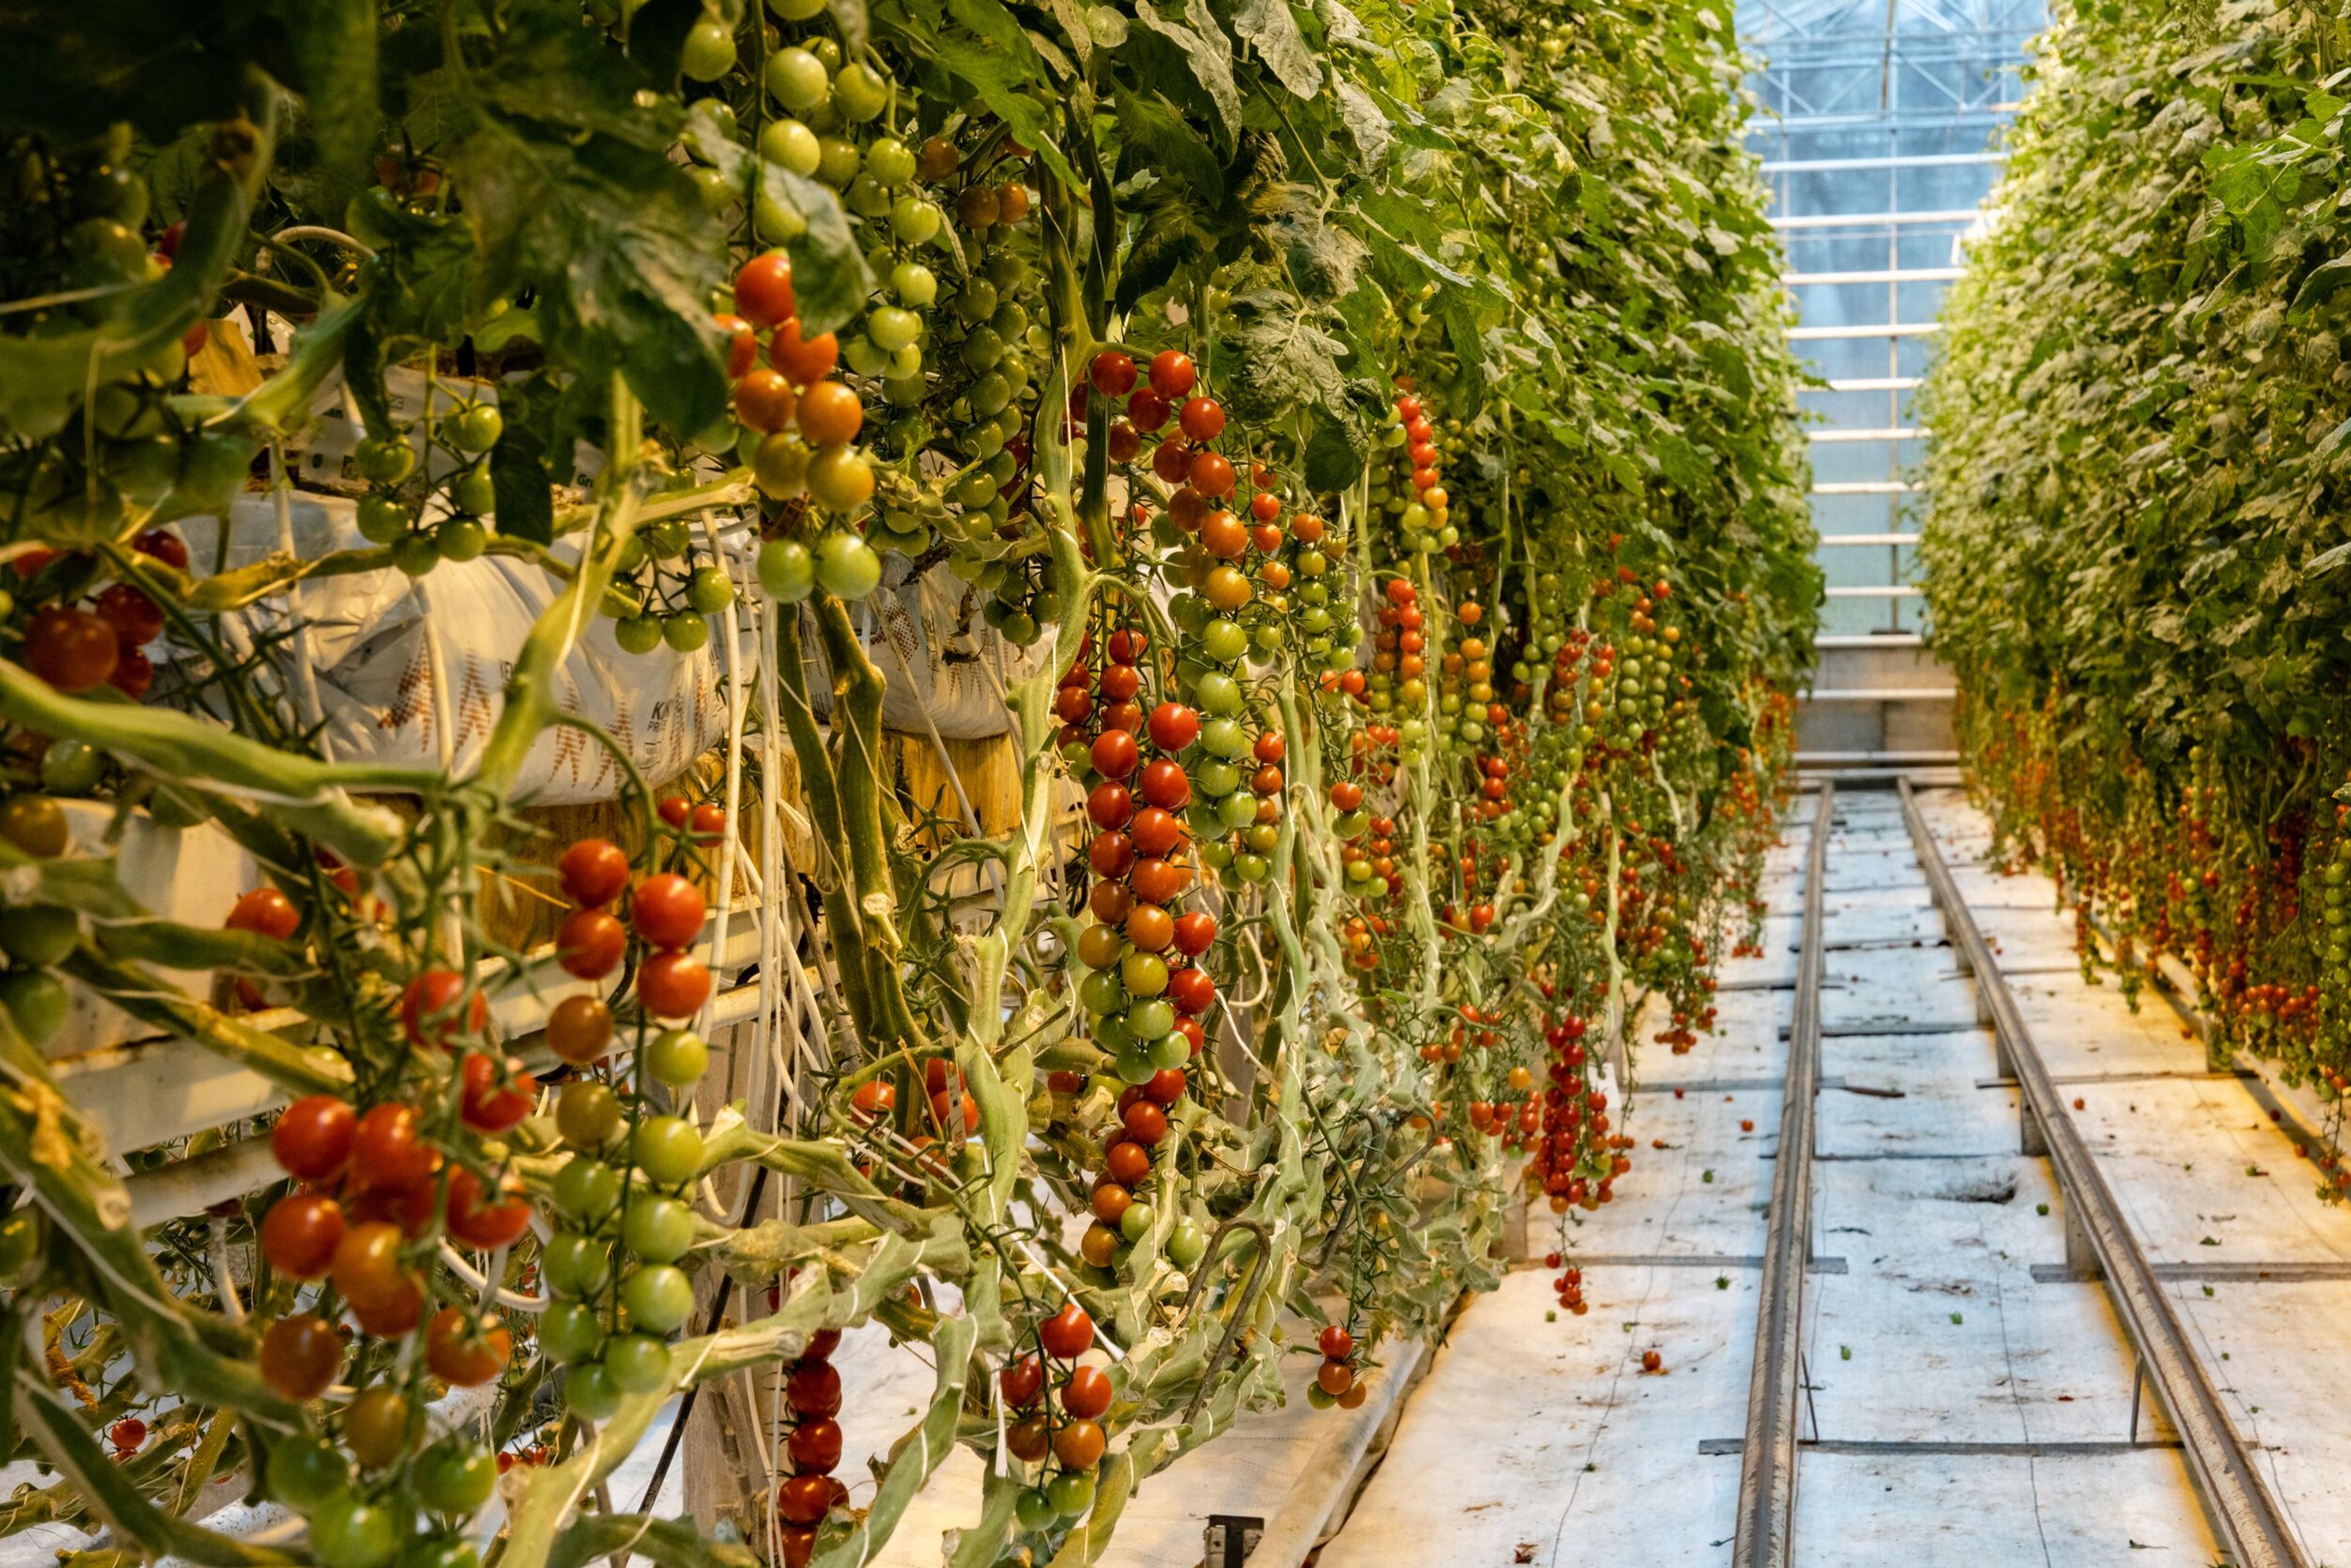 Clusters of small tomatoes ripening on vines inside a sunlit greenhouse.